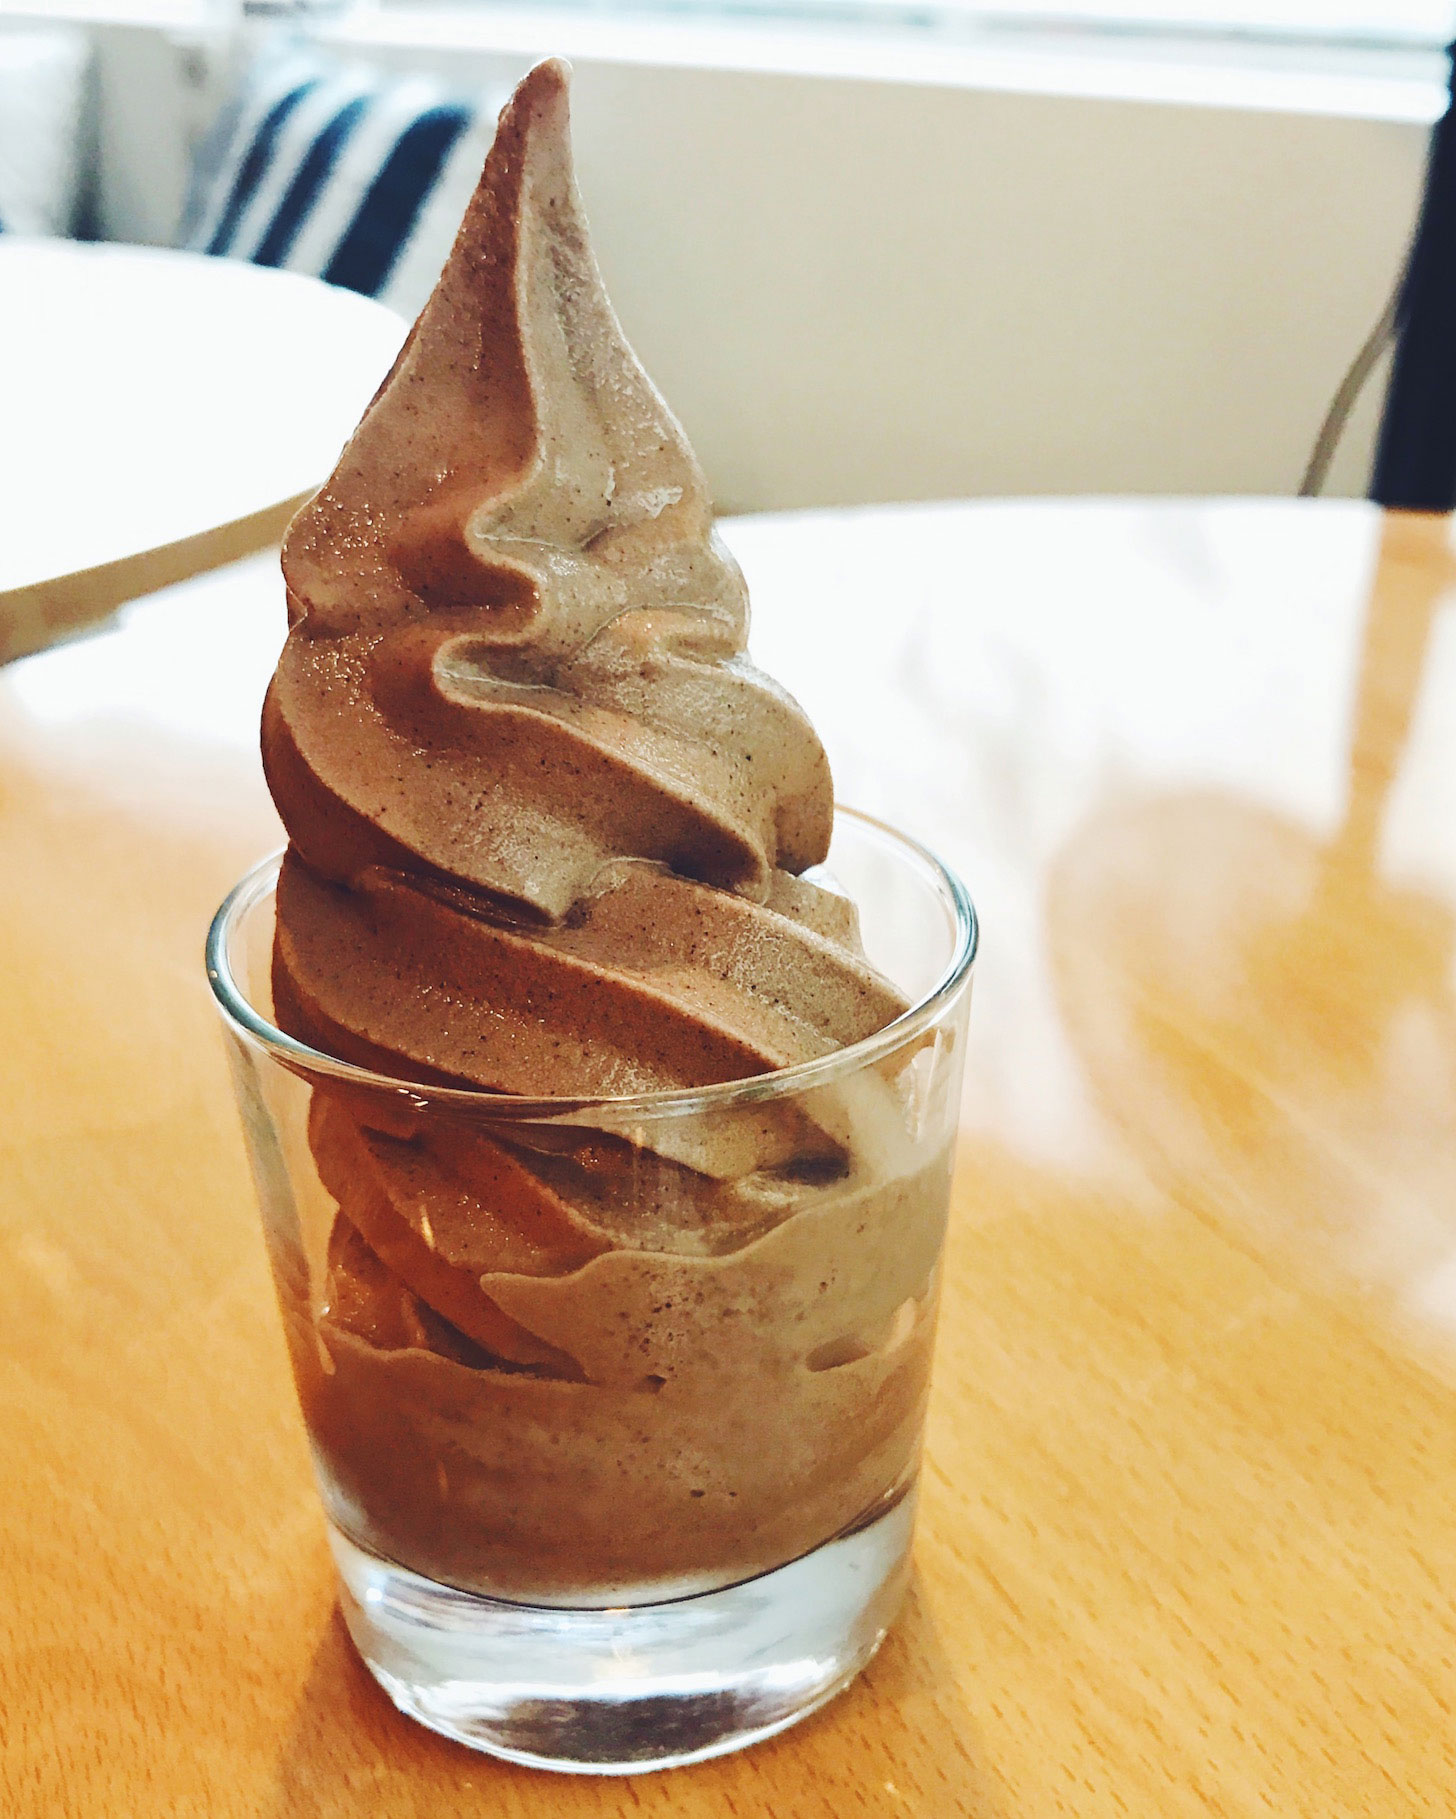 Cup of Chocolate Soft Serve from an ice cream shop in Seoul